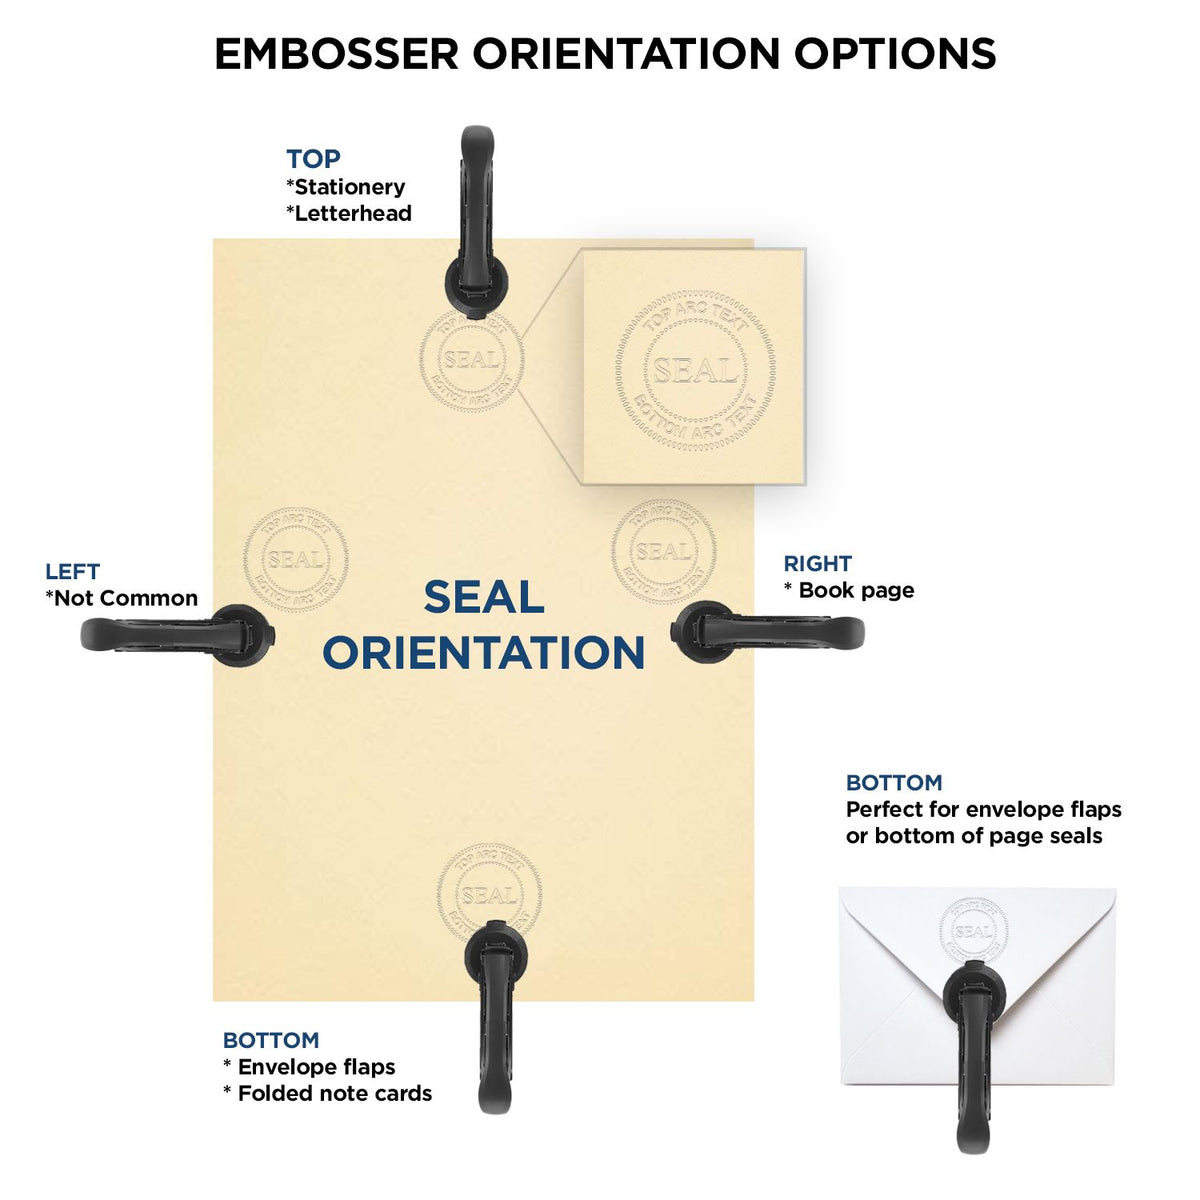 An infographic for the Gift Alaska Architect Seal showing embosser orientation, this is showing examples of a top, bottom, right and left insert.